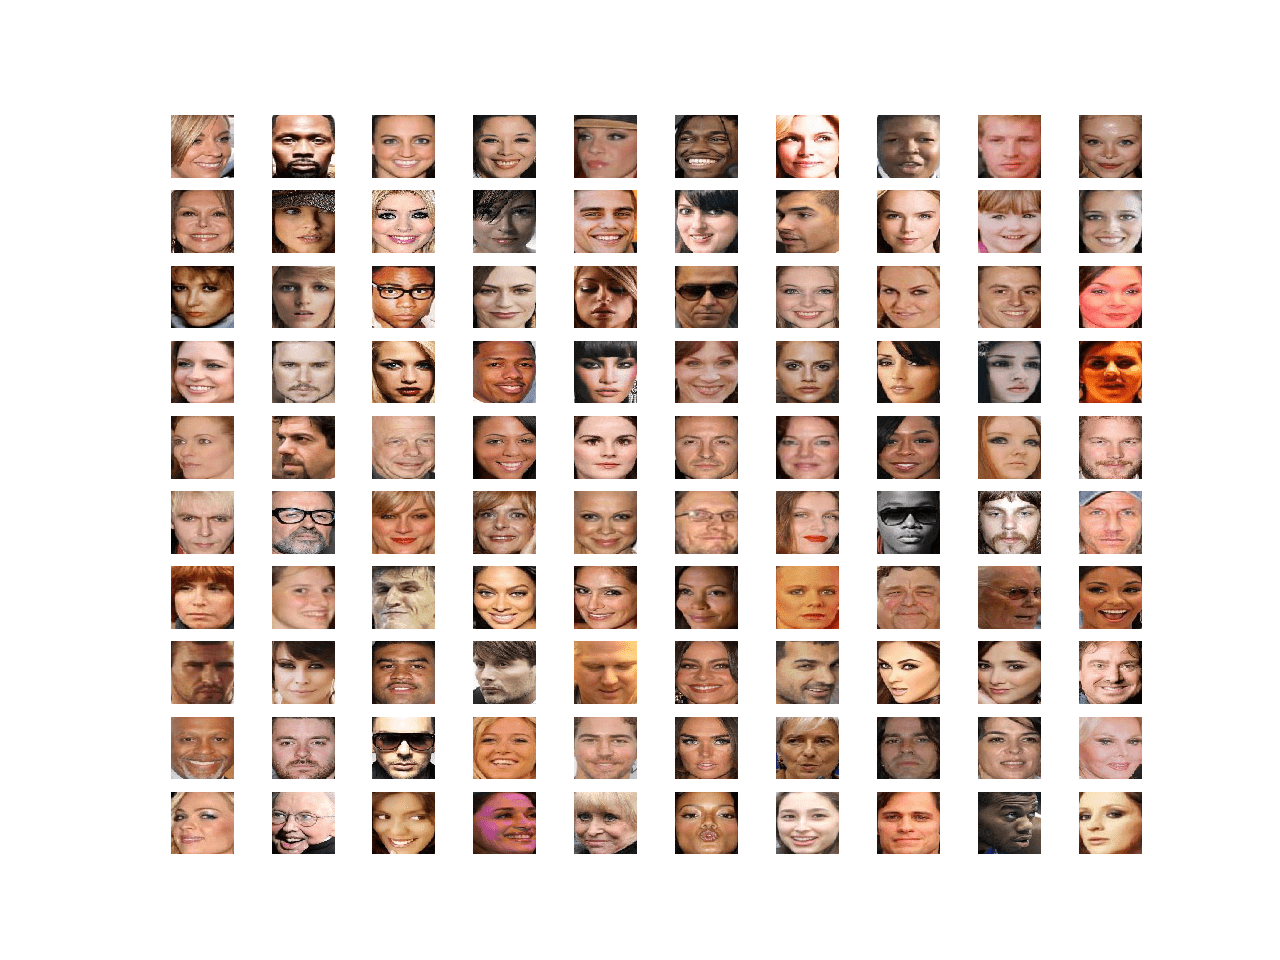 Plot of 100 Celebrity Faces in a 10x10 Grid